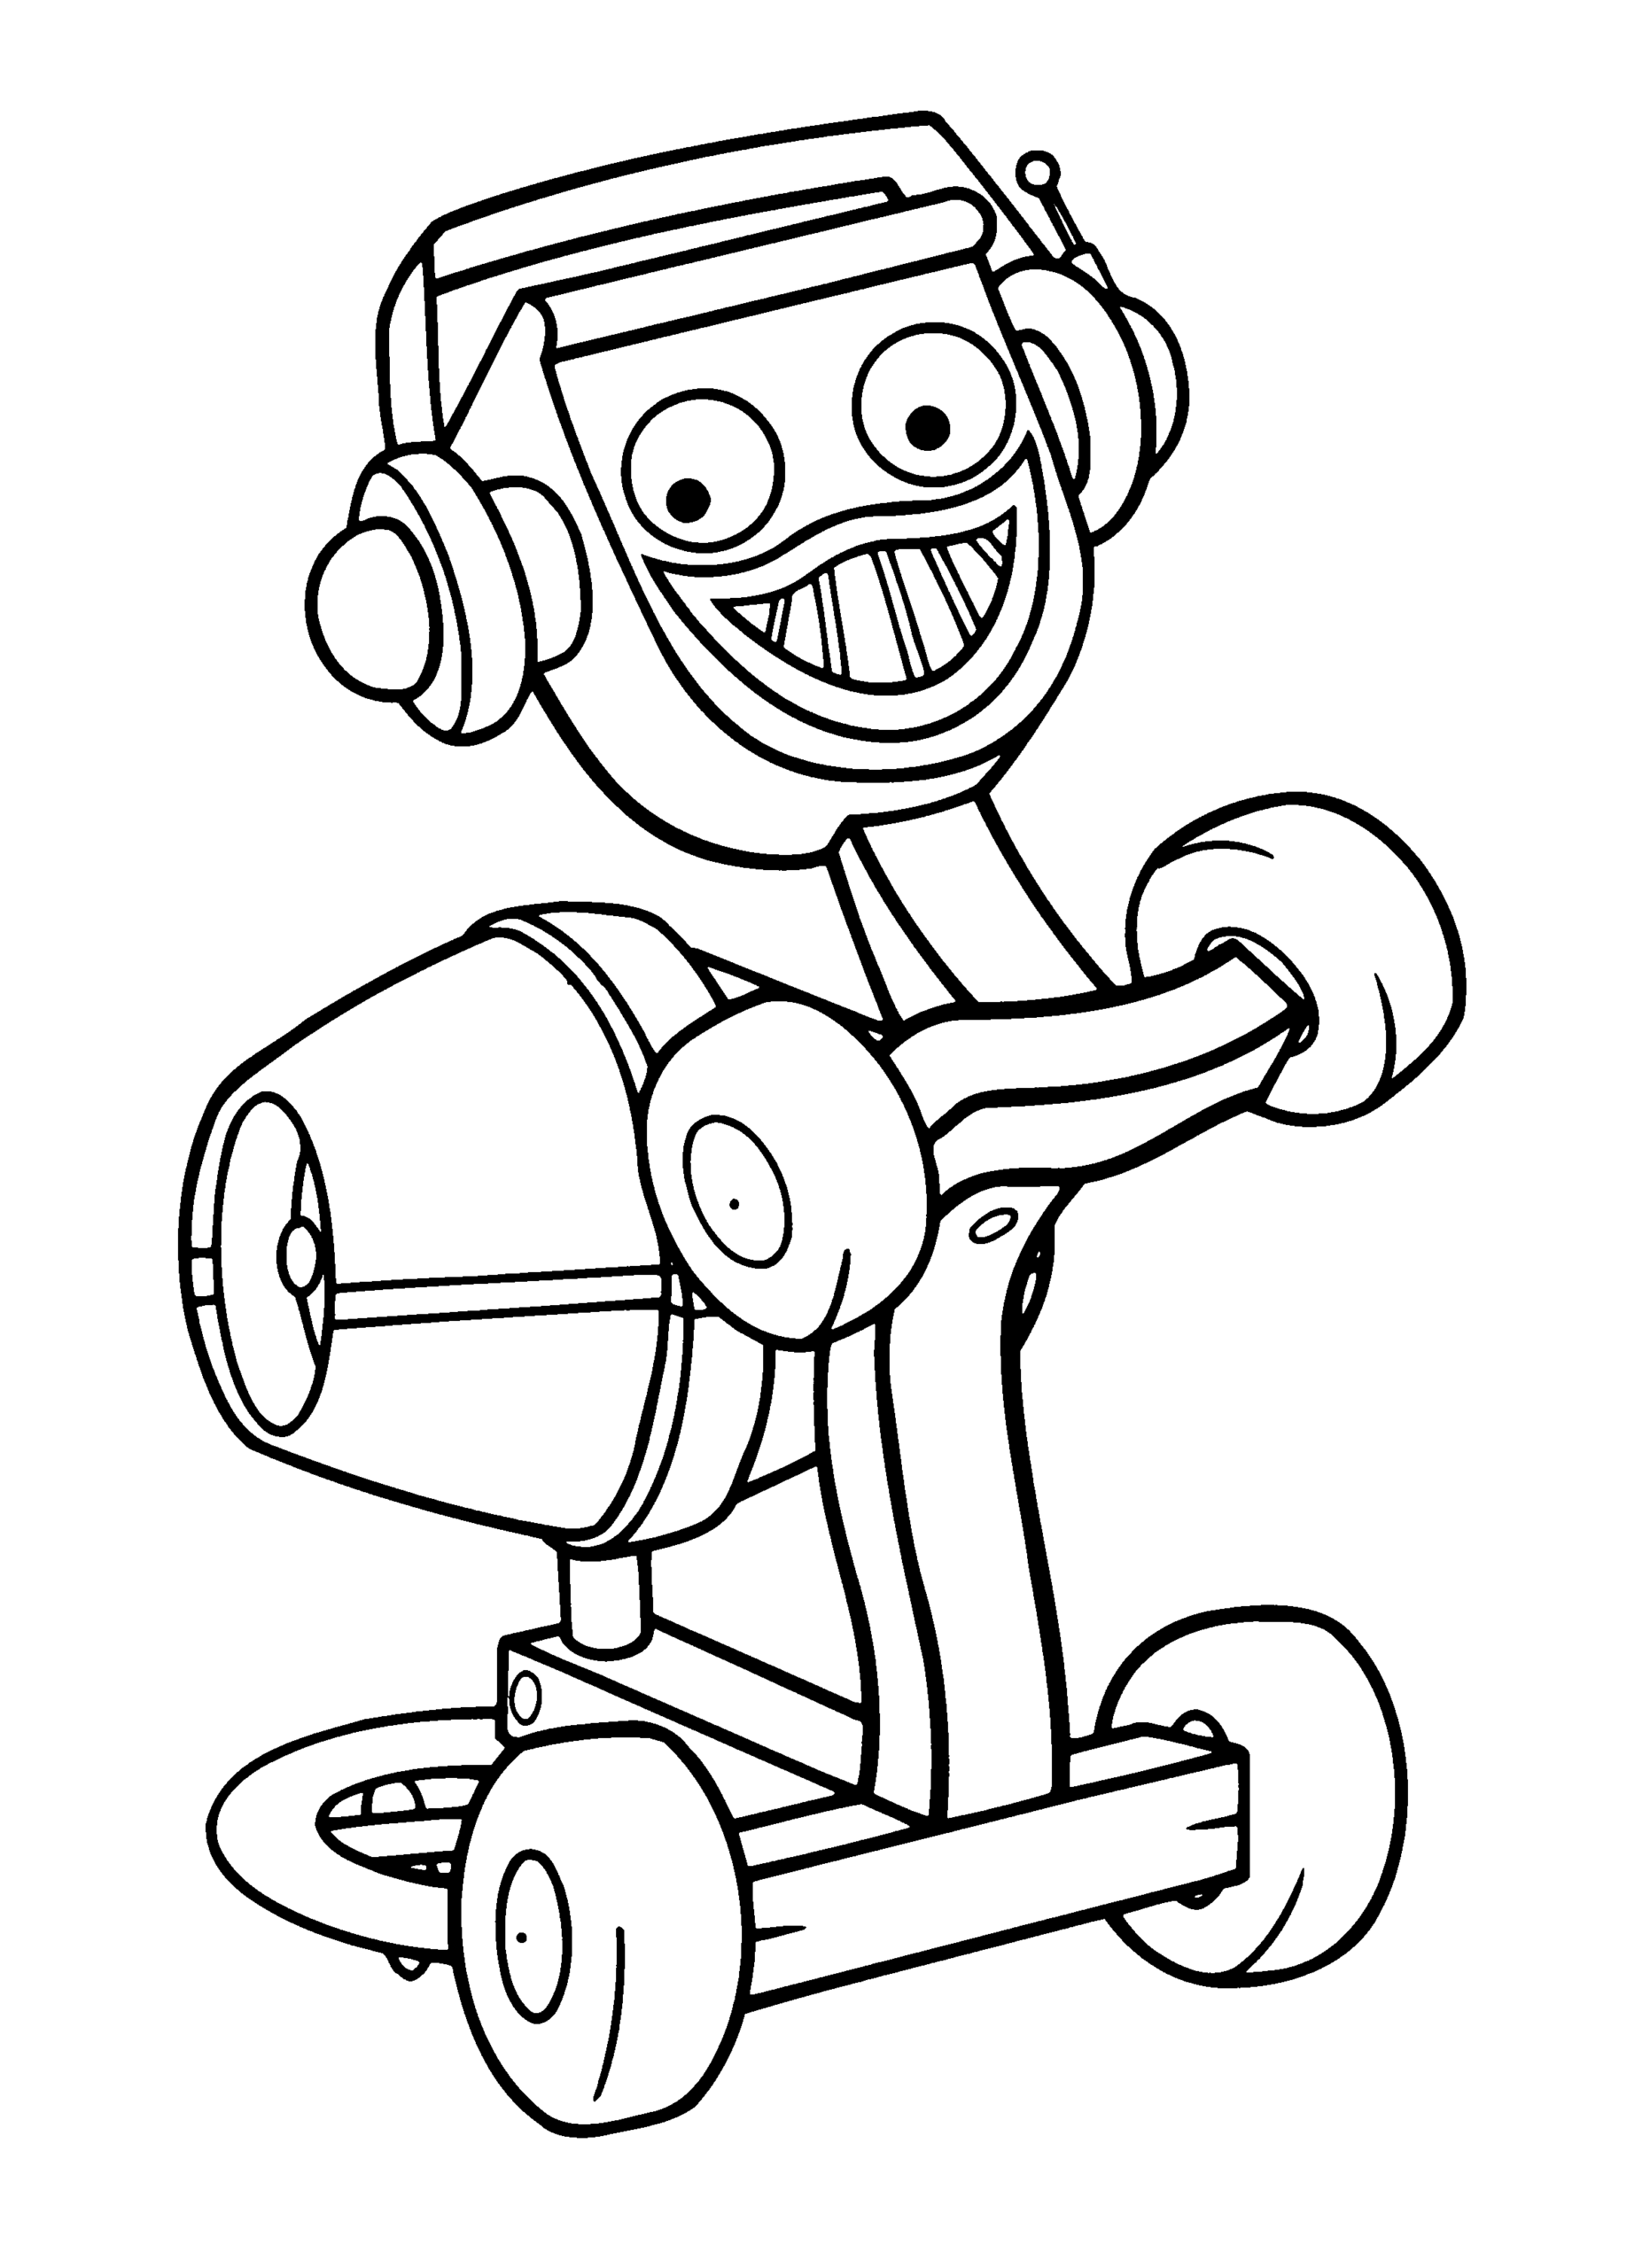 Bob the Builder Coloring Pages TV Film bob the builder 23 Printable 2020 01041 Coloring4free